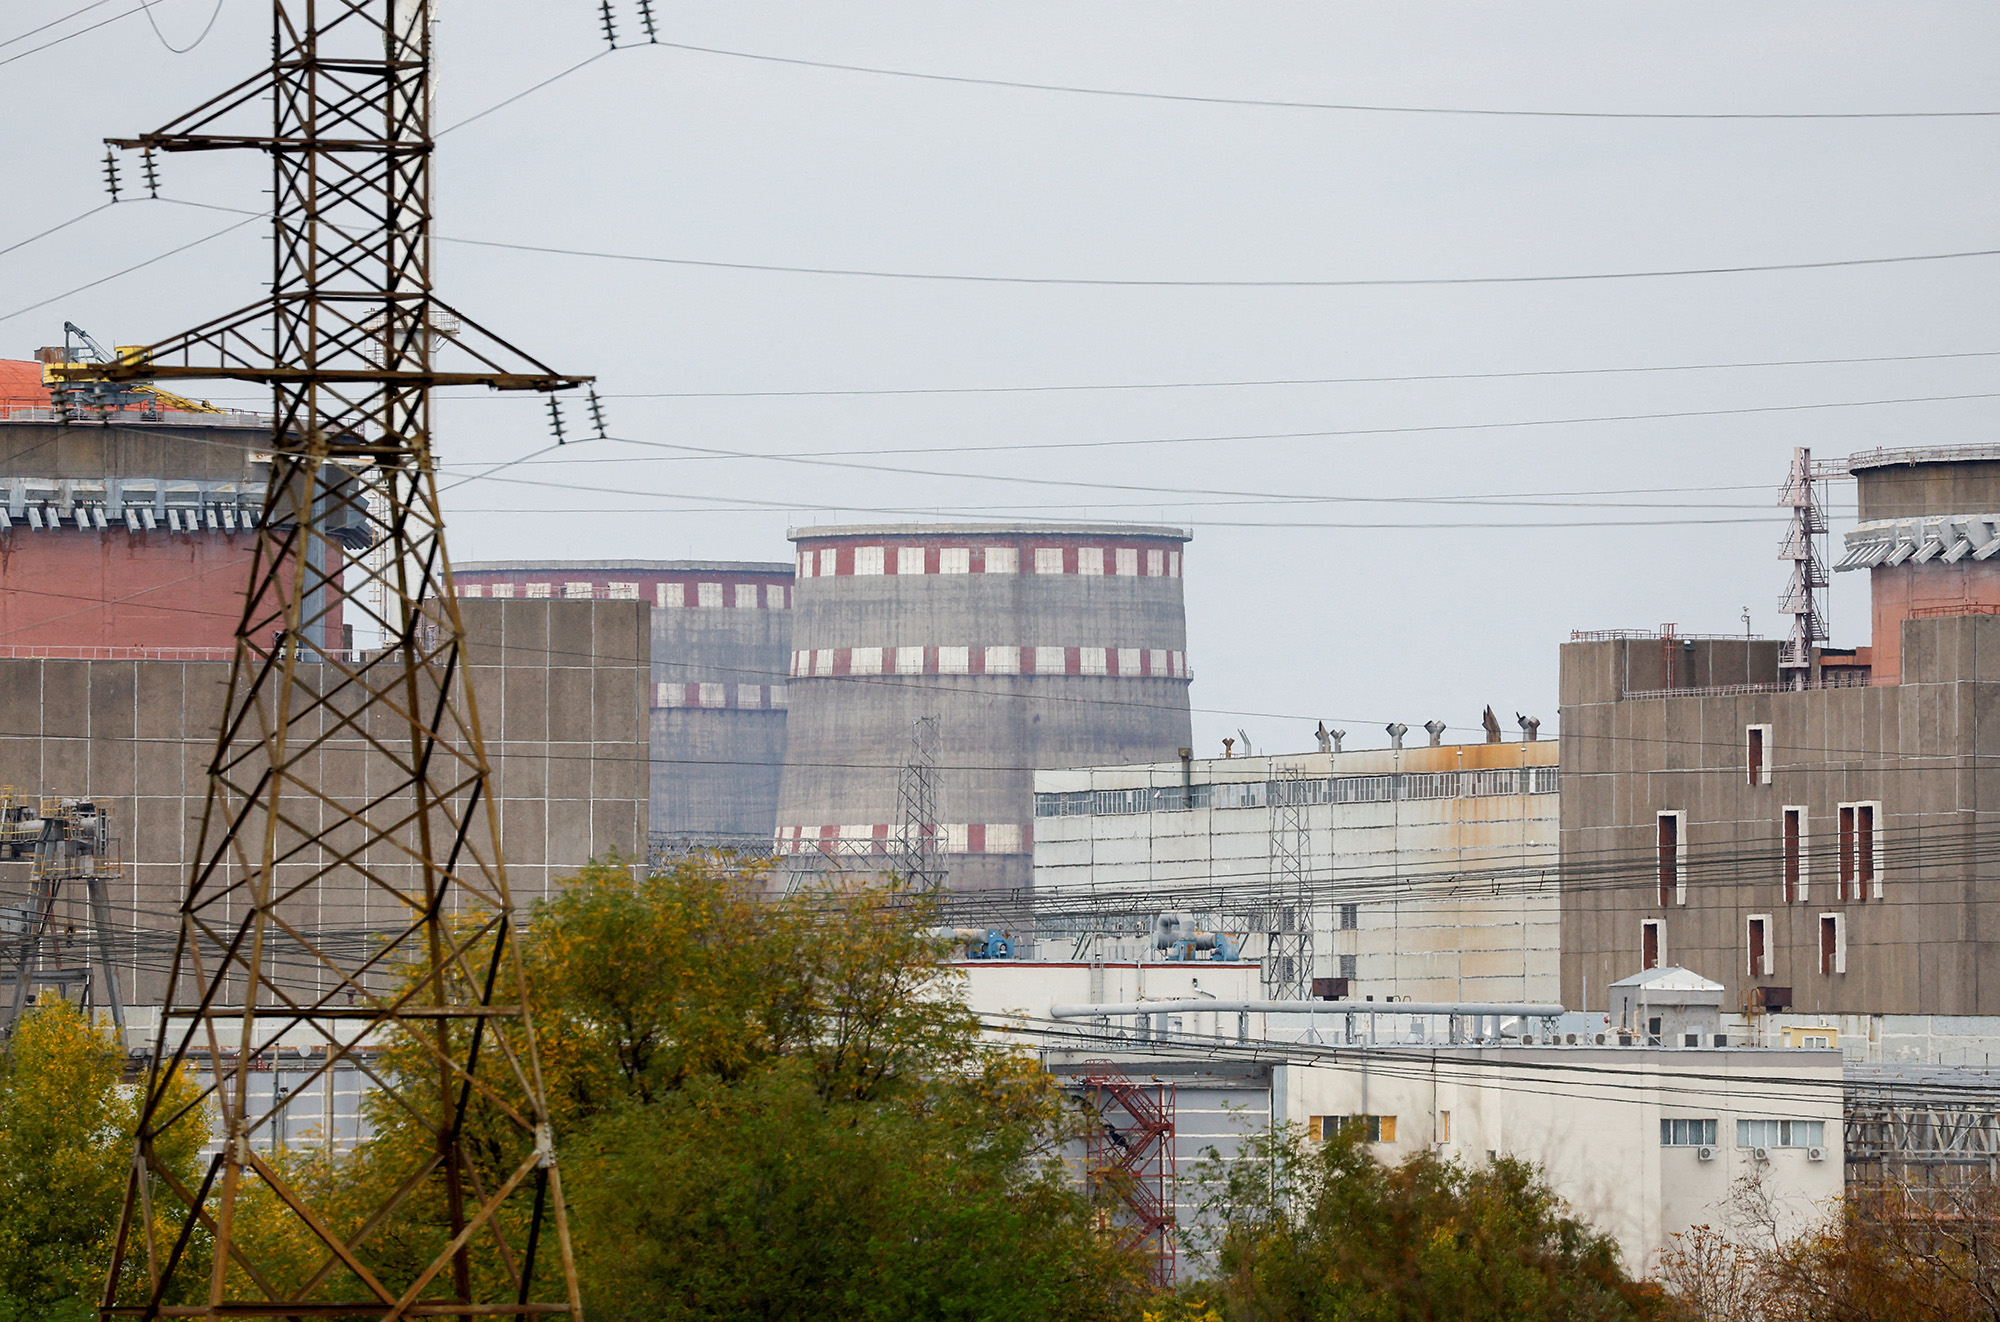 Russian-backed government deny Ukraine’s claims about withdrawal from Zaporizhzia nuclear plant